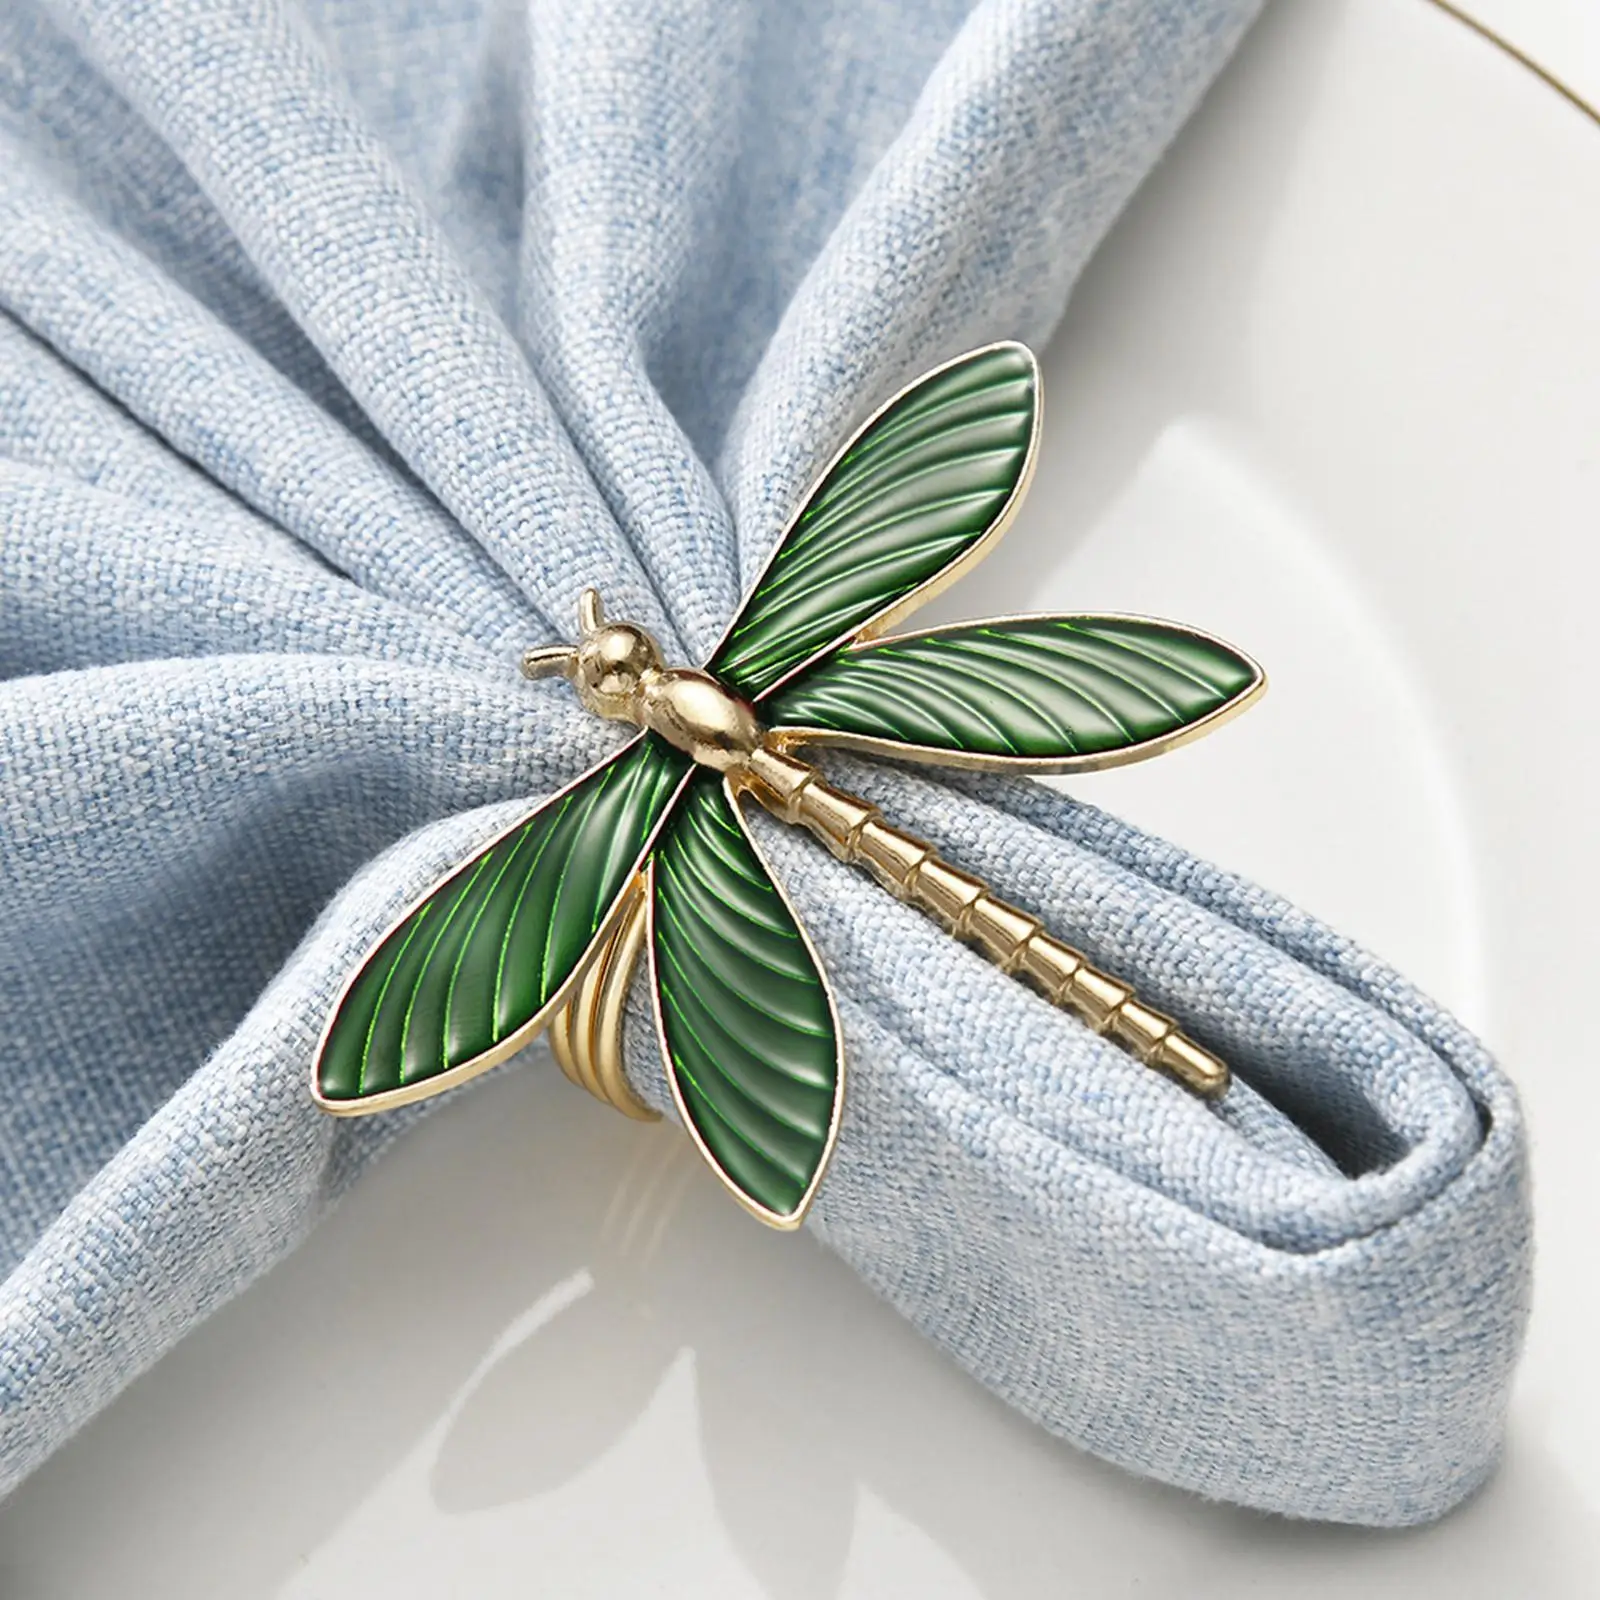 Dragonfly Napkin Rings, Napkin Buckle, Metal Dragonfly Napkin Holders, Table Decoration Rings, for Easter Wedding Party Home